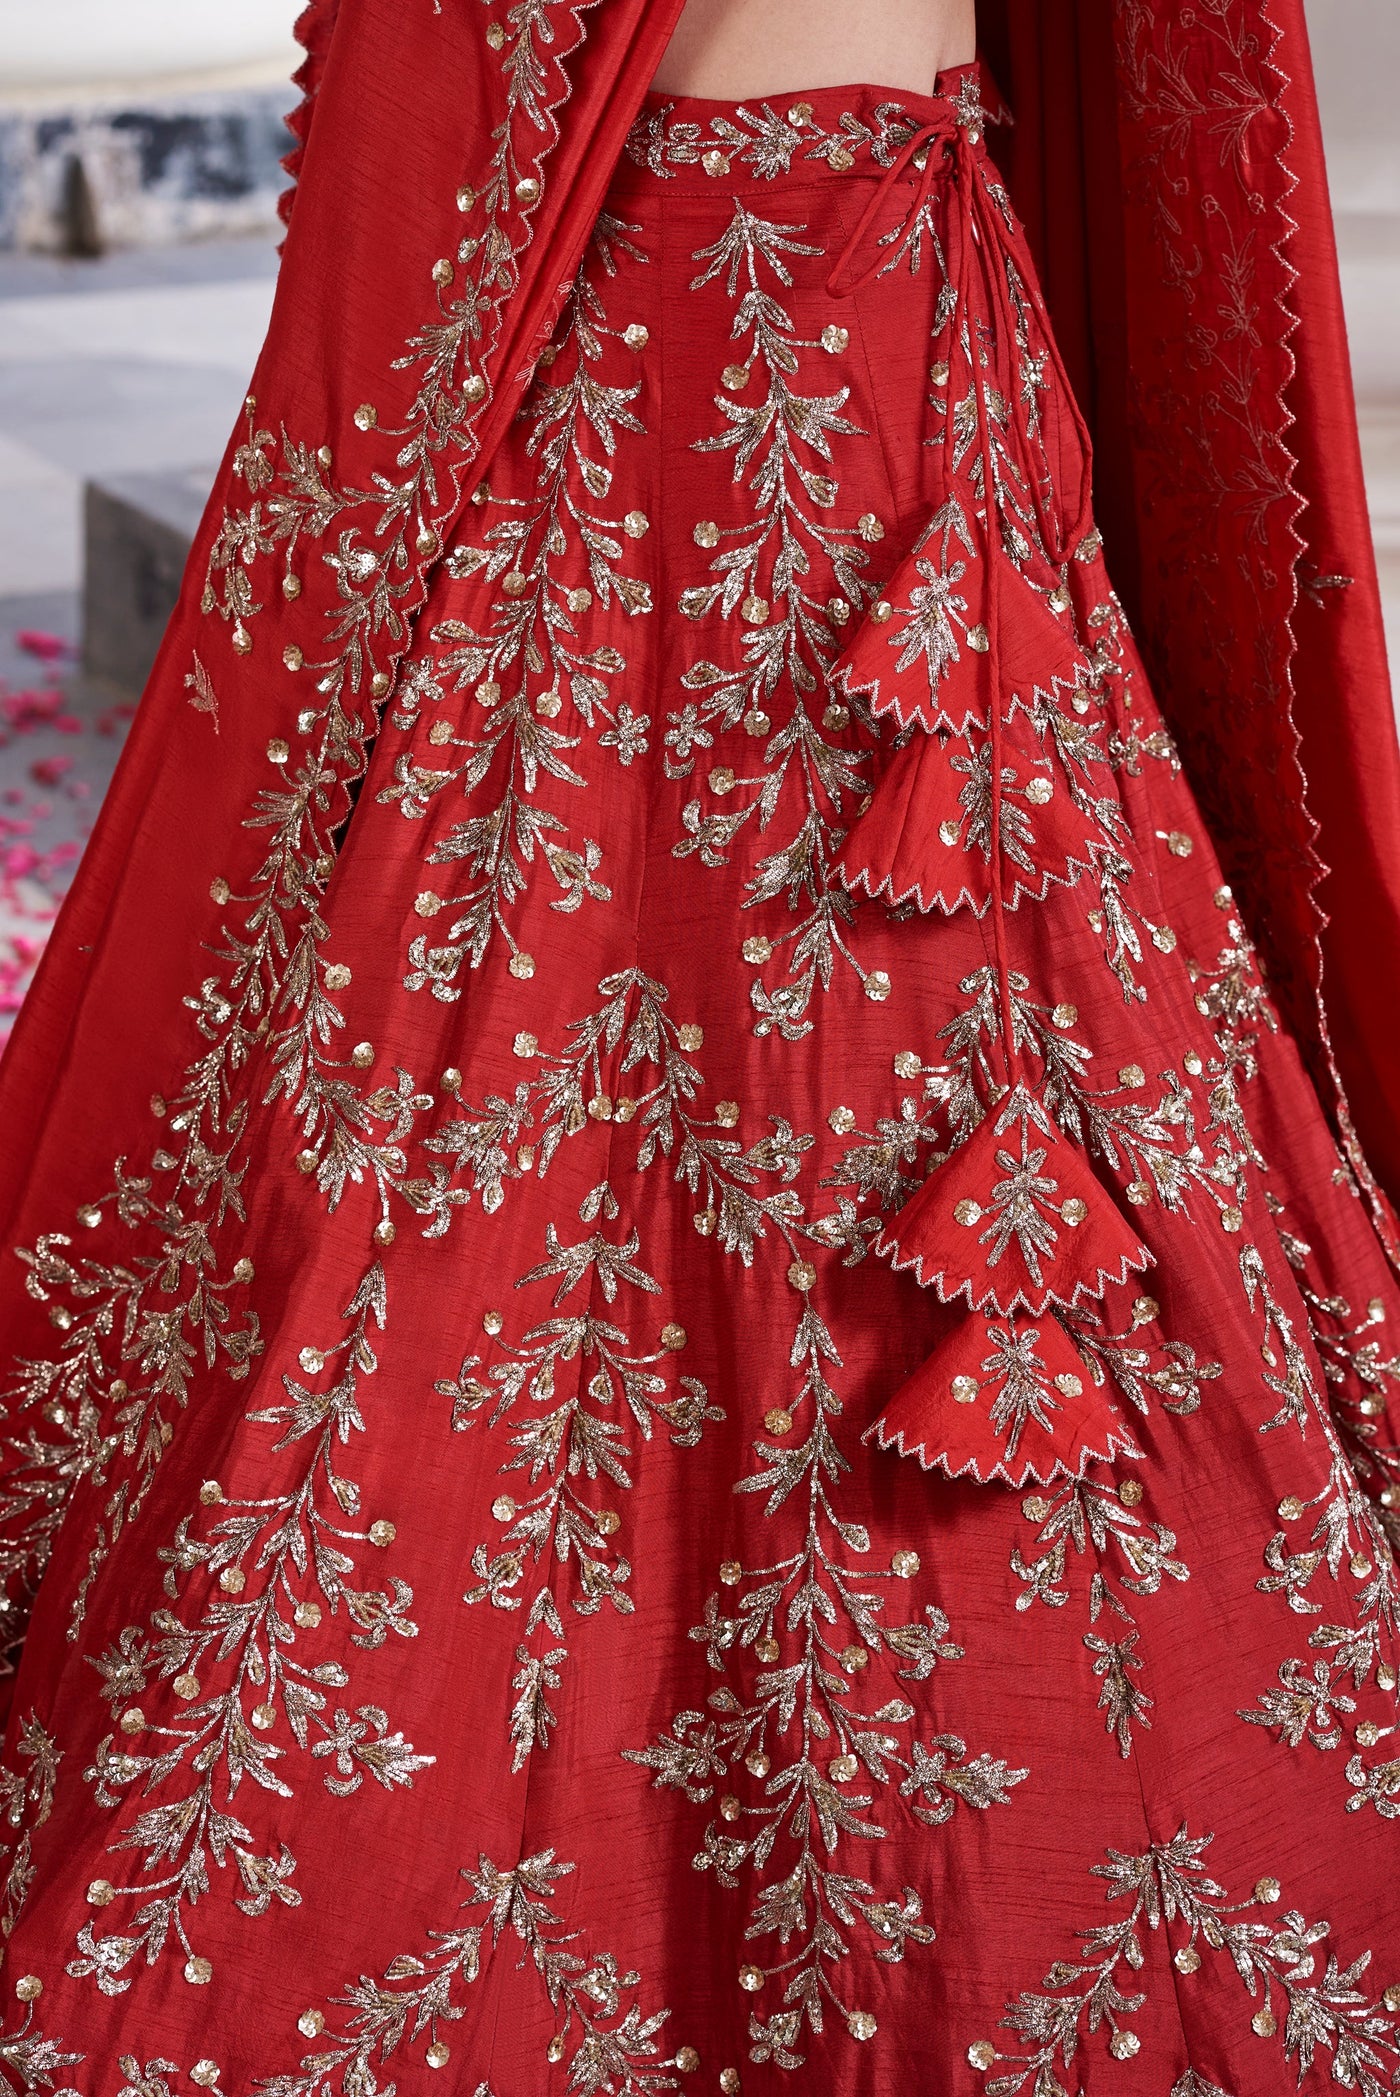 Red Scallop Lehenga with Veil - Indian Clothing in Denver, CO, Aurora, CO, Boulder, CO, Fort Collins, CO, Colorado Springs, CO, Parker, CO, Highlands Ranch, CO, Cherry Creek, CO, Centennial, CO, and Longmont, CO. Nationwide shipping USA - India Fashion X